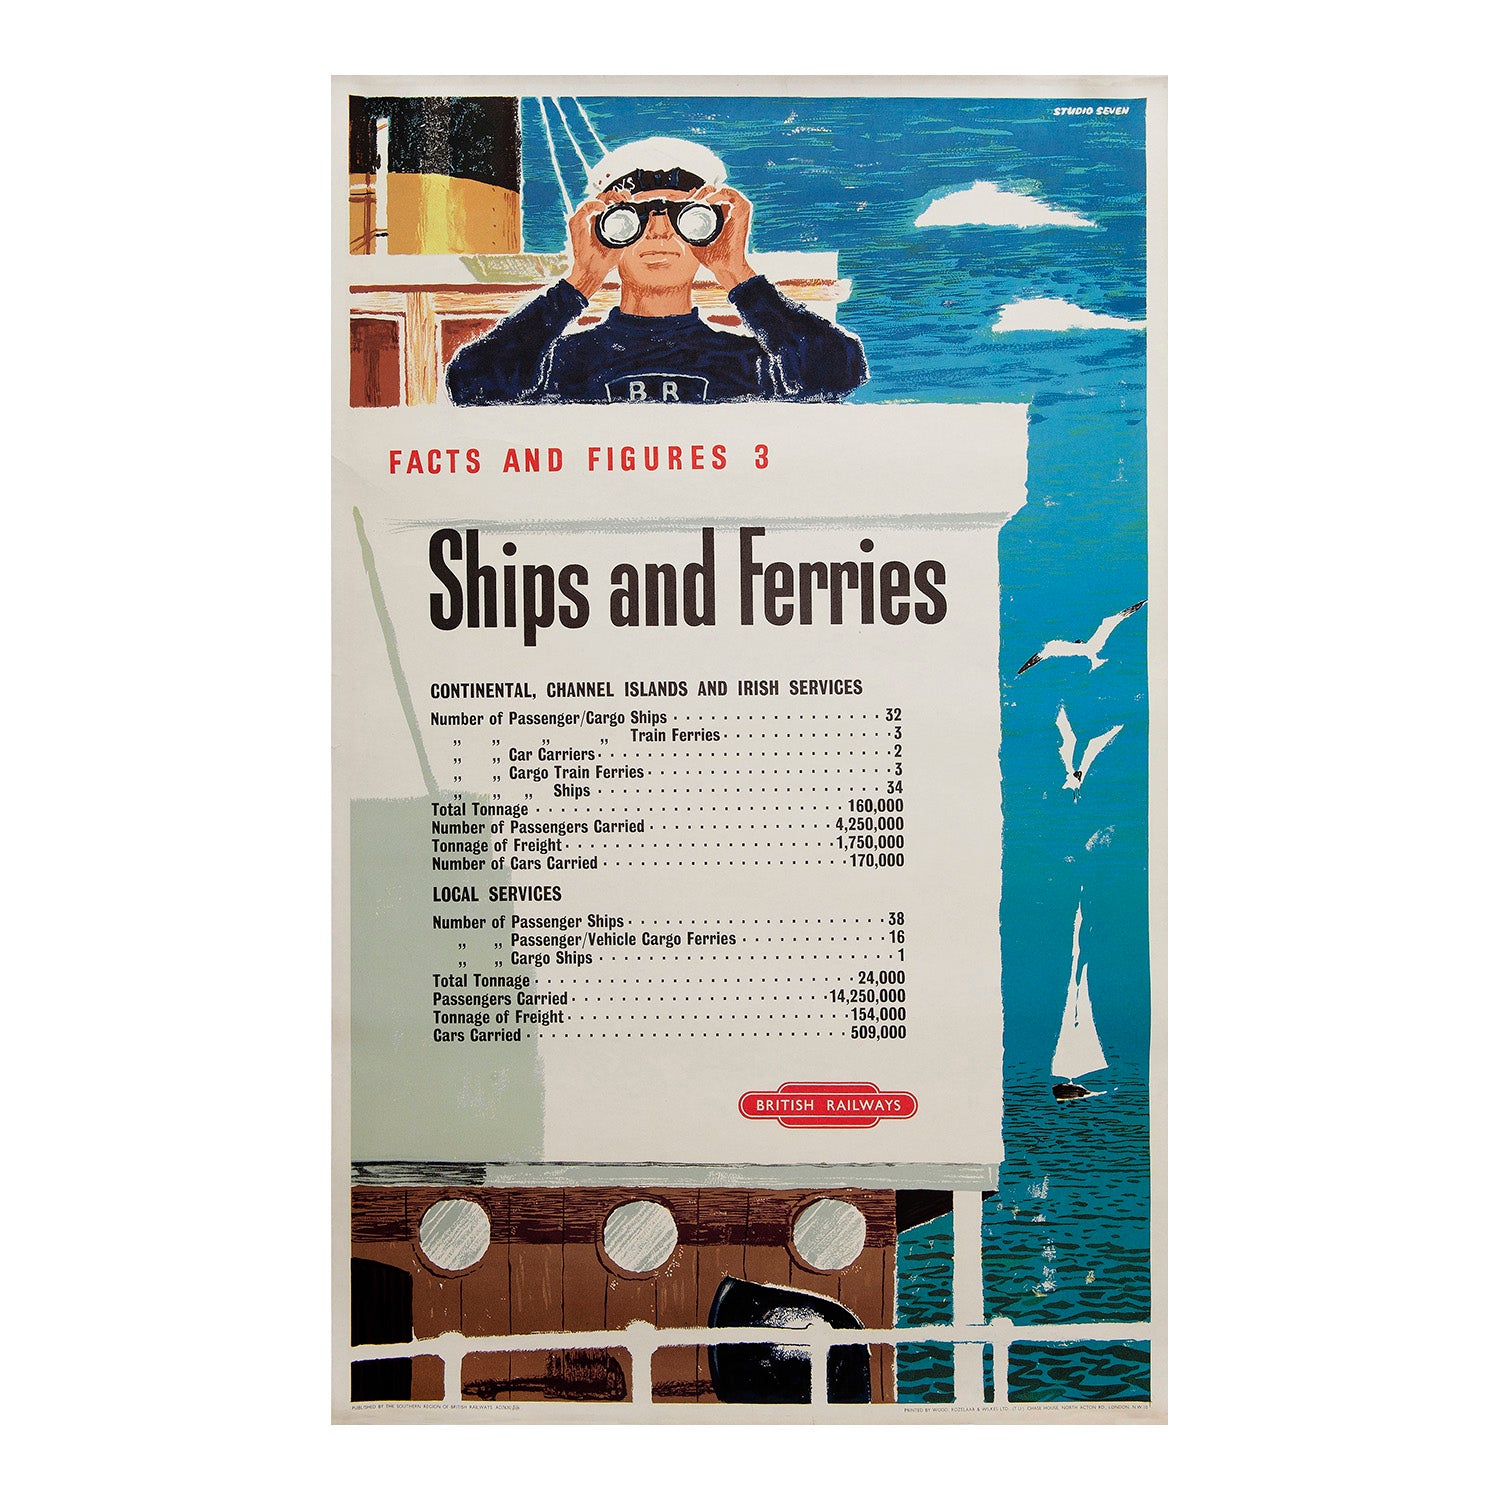 An original British Railways poster, designed by Studio Seven, 1956. The poster lists the surprising number of ships and ferries operated by British Railways in the 1950s.